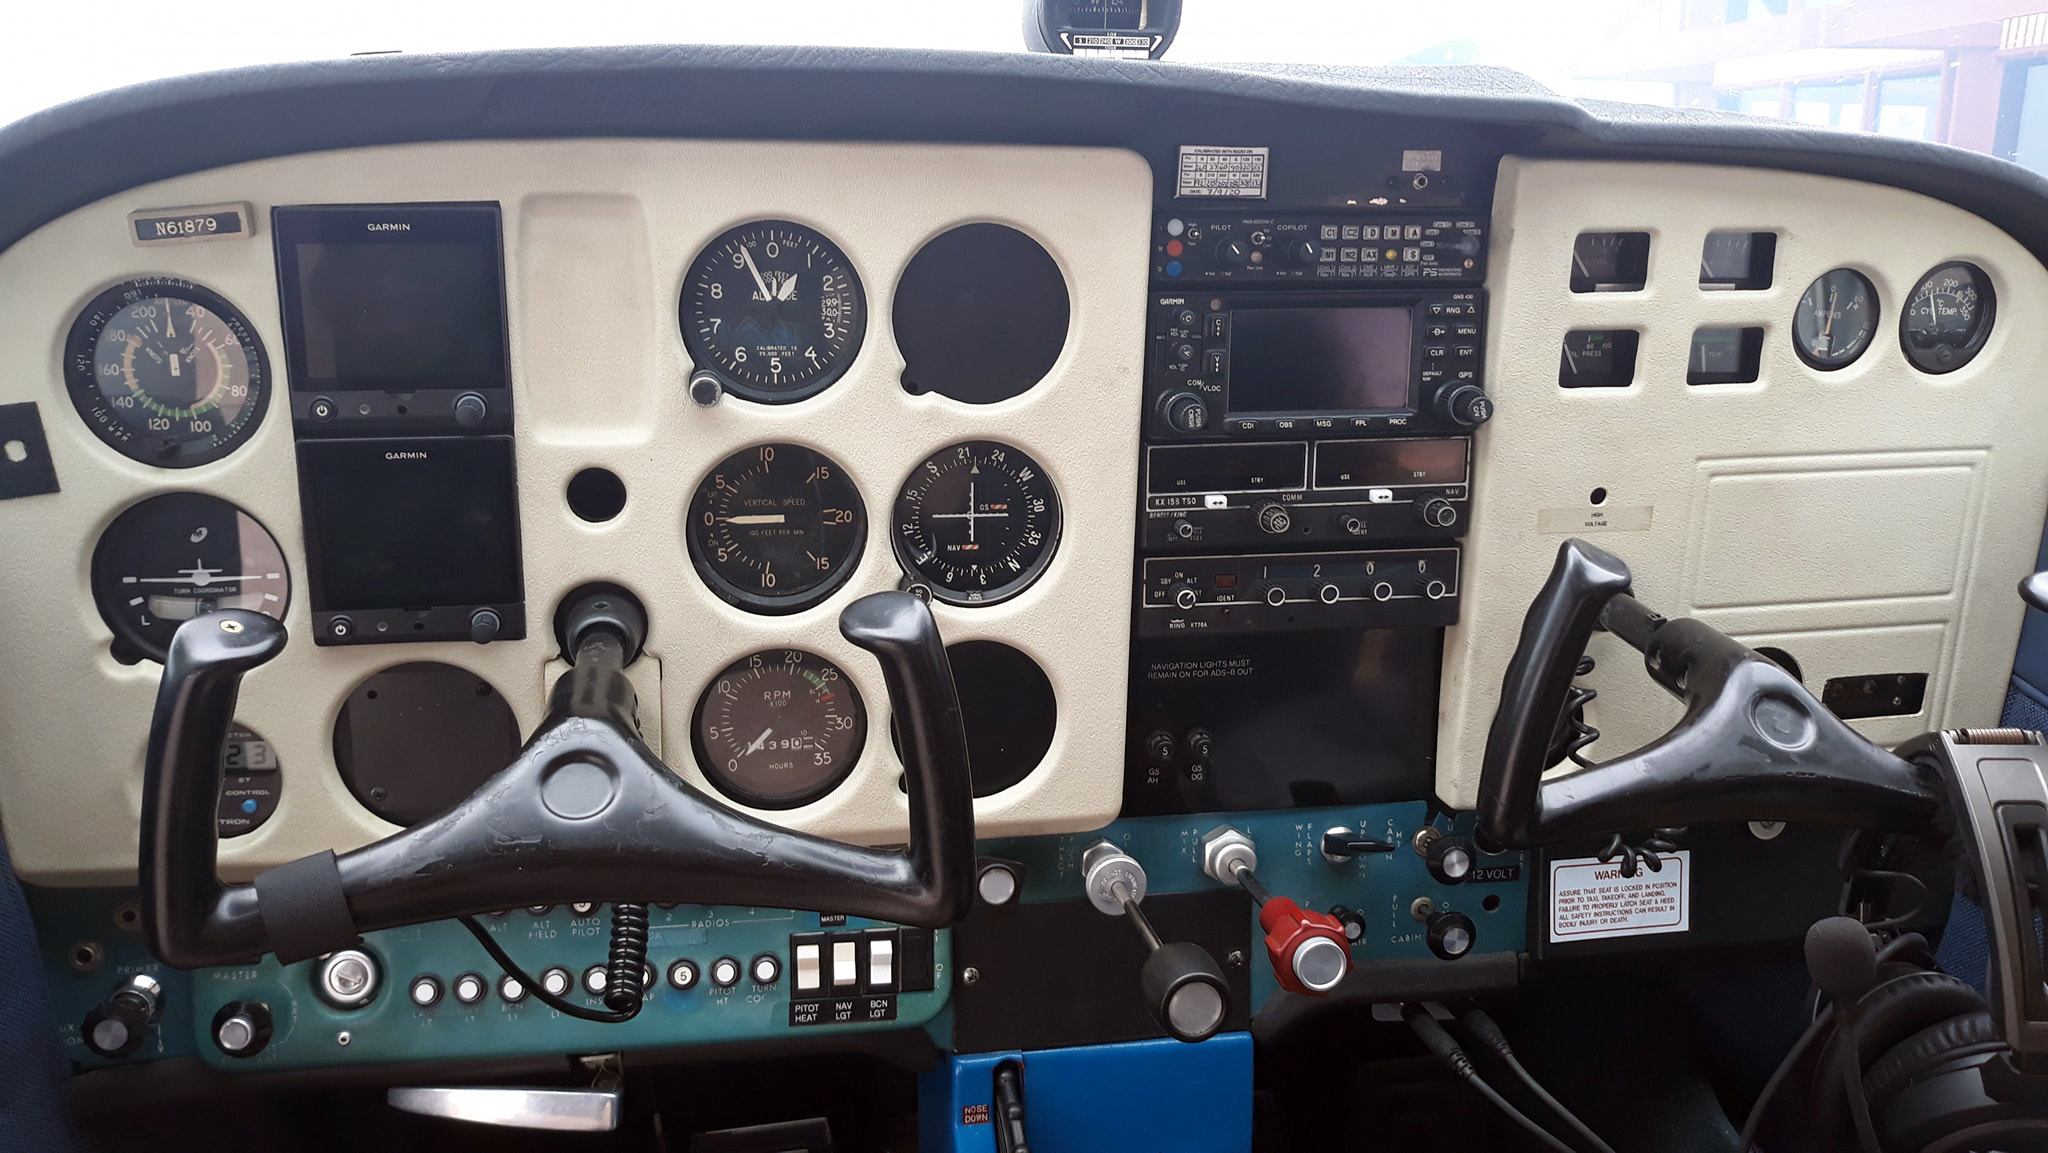 The dashboard of the airplane Niki trained in